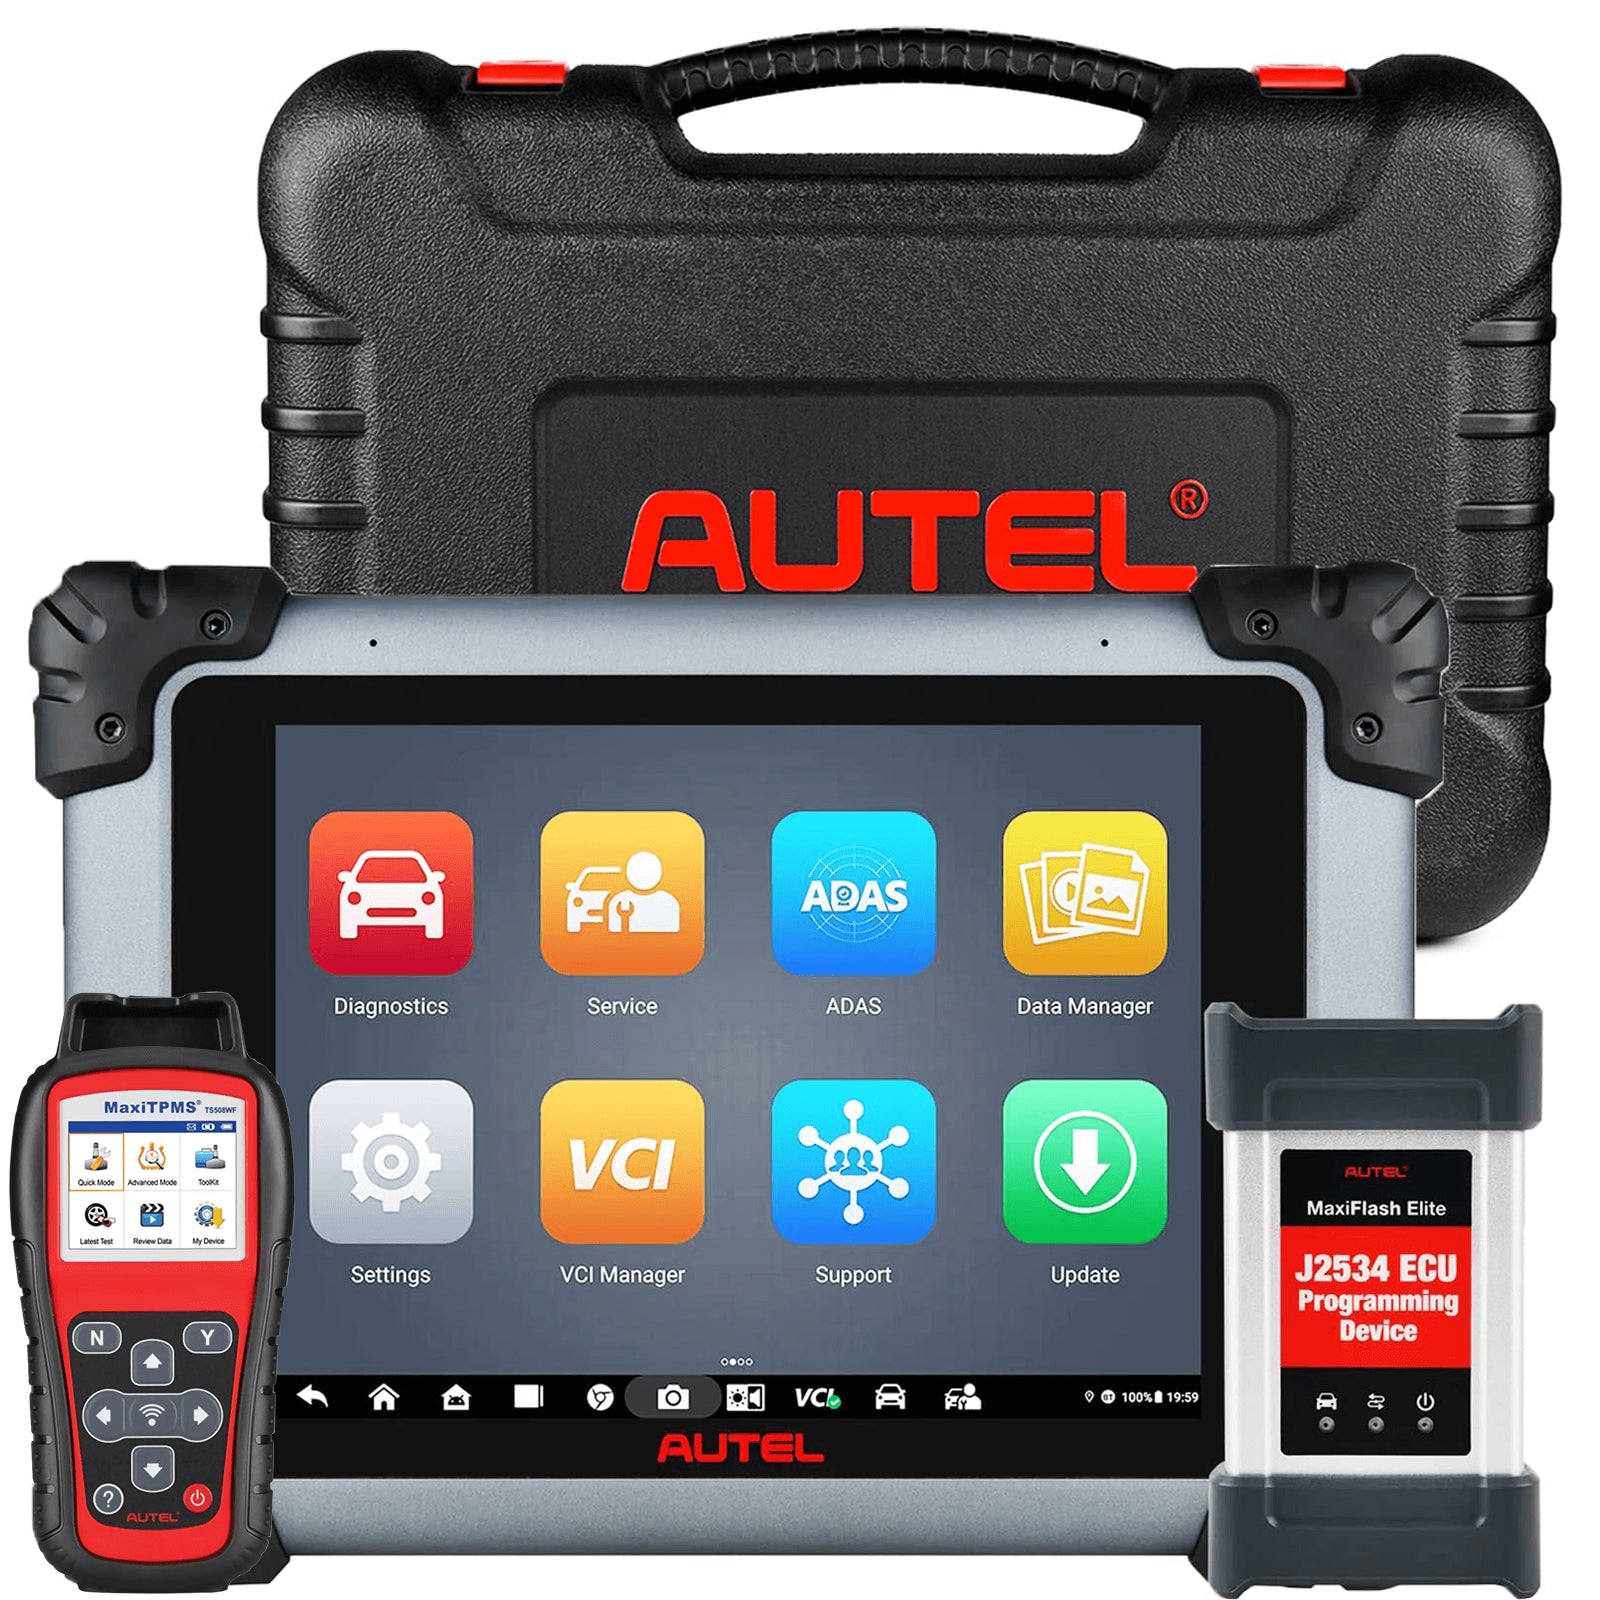 2023 Autel MaxiSYS MS908S PRO II J2534 ECU Programming Coding Adaption Car Scan Tool, Update of MK908P, Same Programming As MSUltra, Active Test 36+ Services